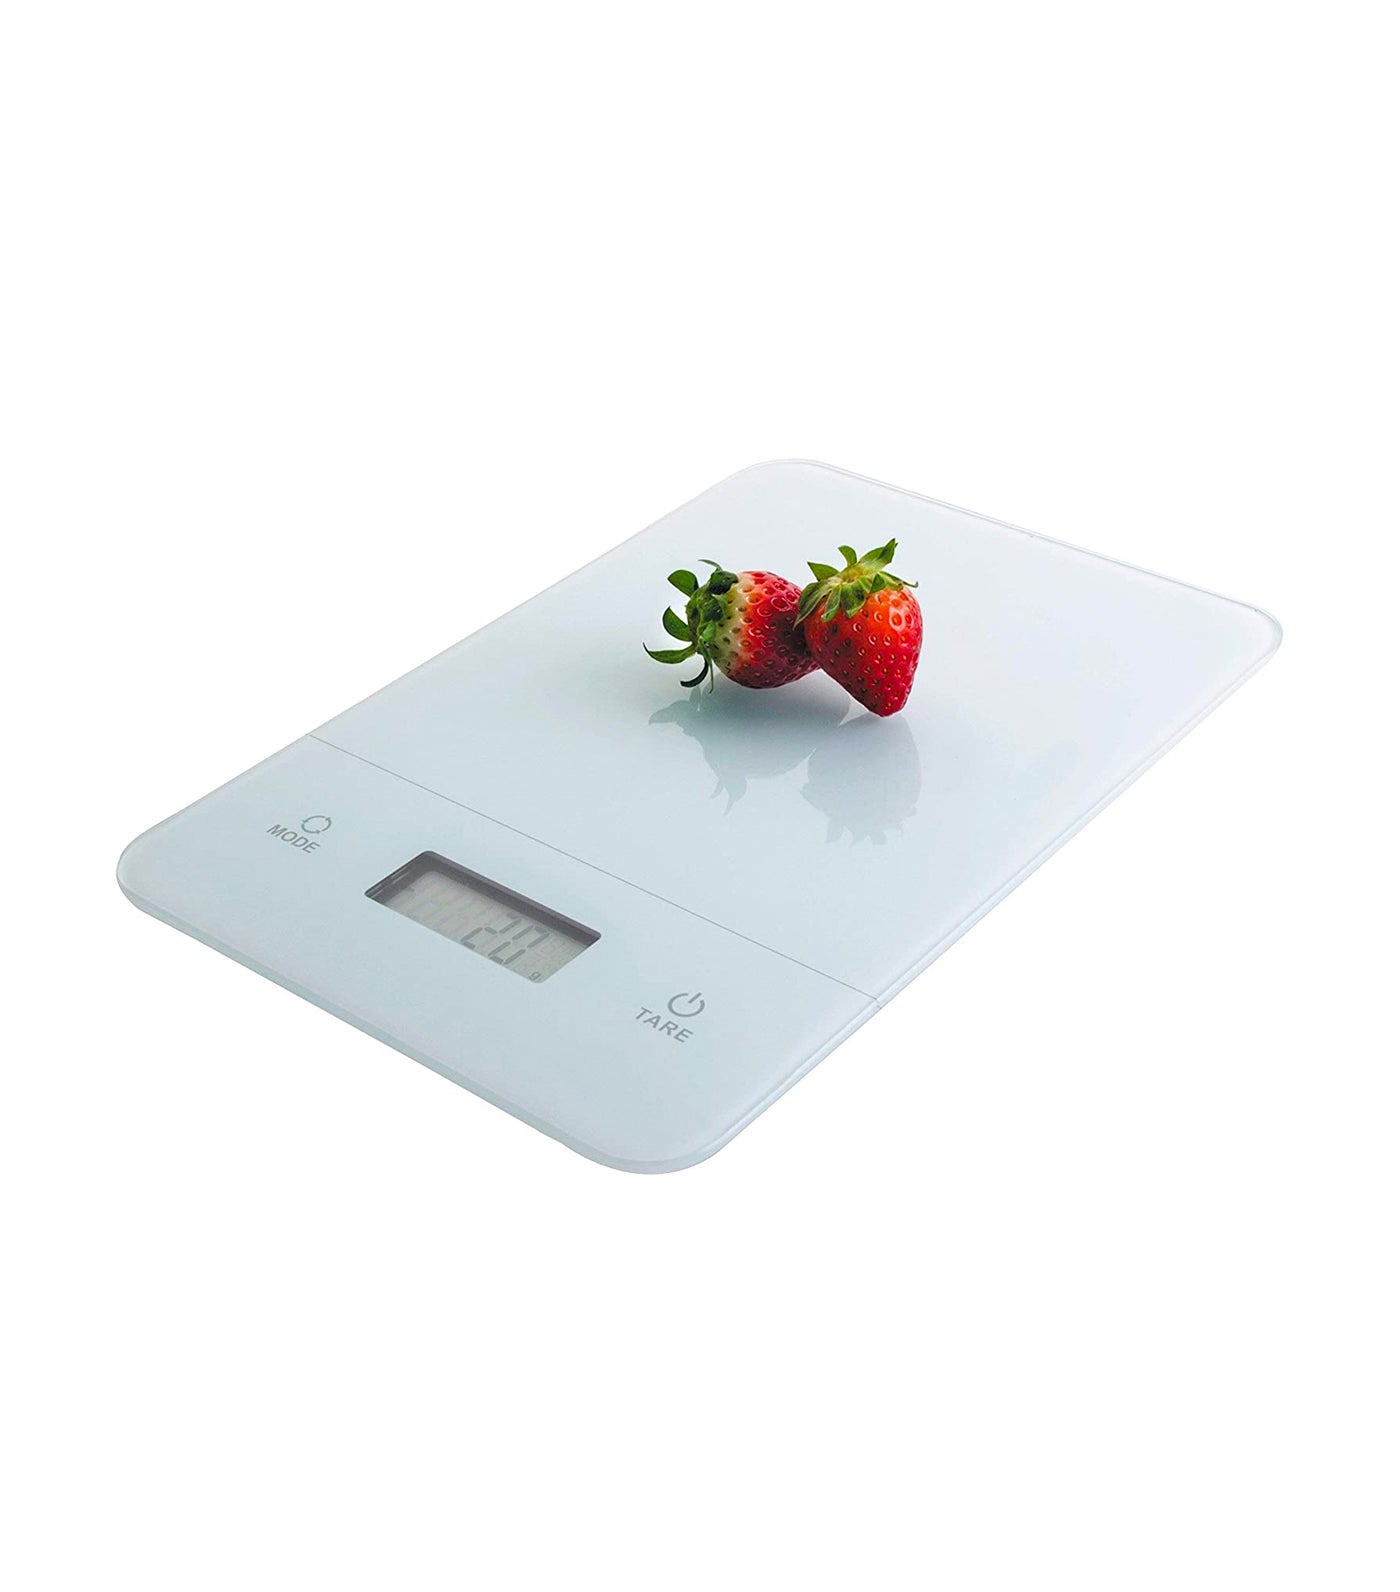 Lacor Electronic Glass Scale - White 